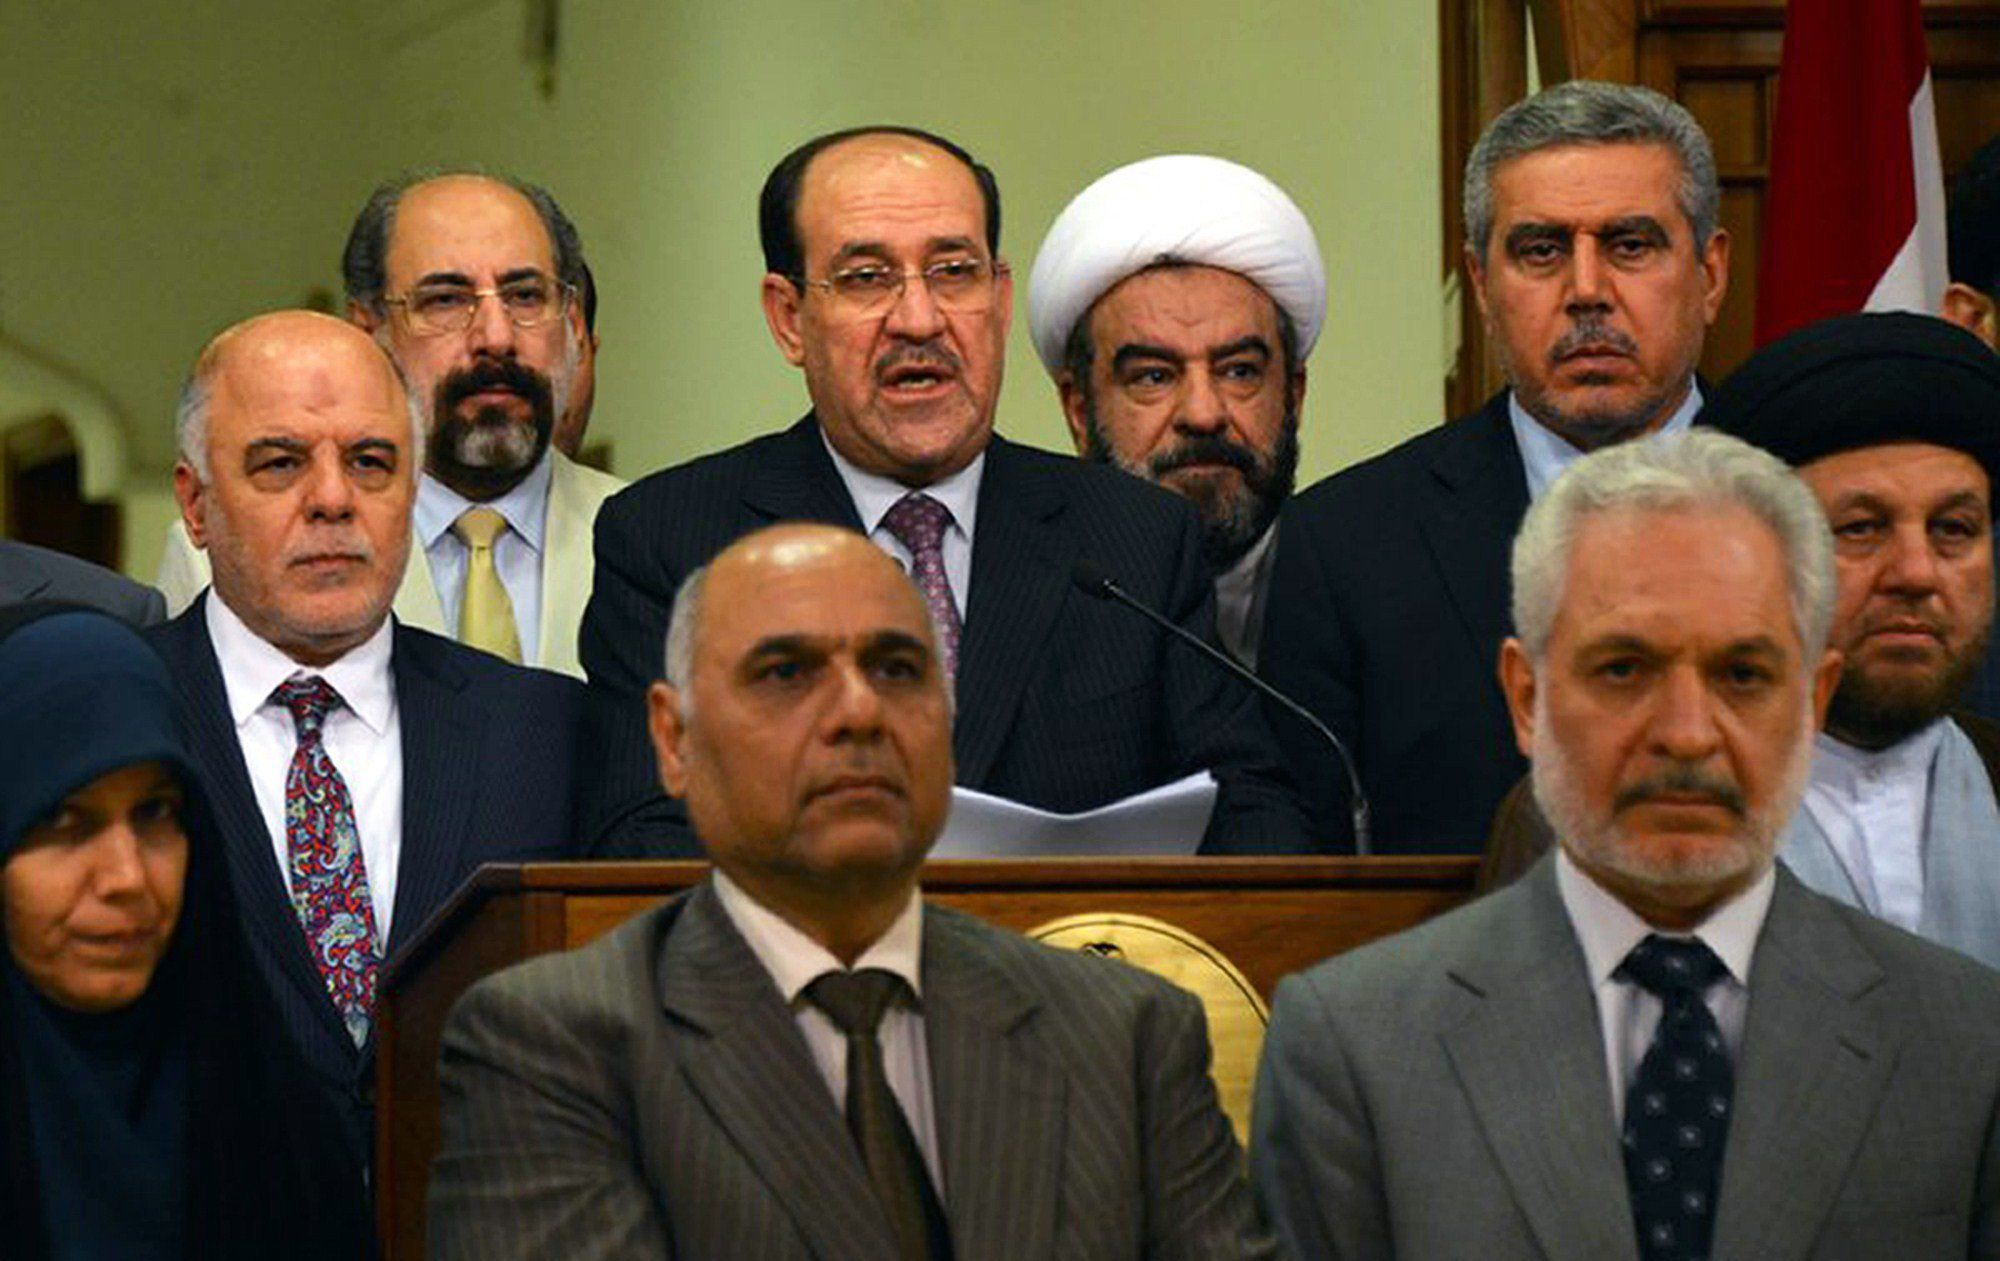 Outgoing Iraqi prime minister Nuri al-Maliki, alongside his designated successor Haidar al-Abadi, delivering a speech in which he announced withdrawing his candidacy for a third term in a photo released Aug. 14, 2014,